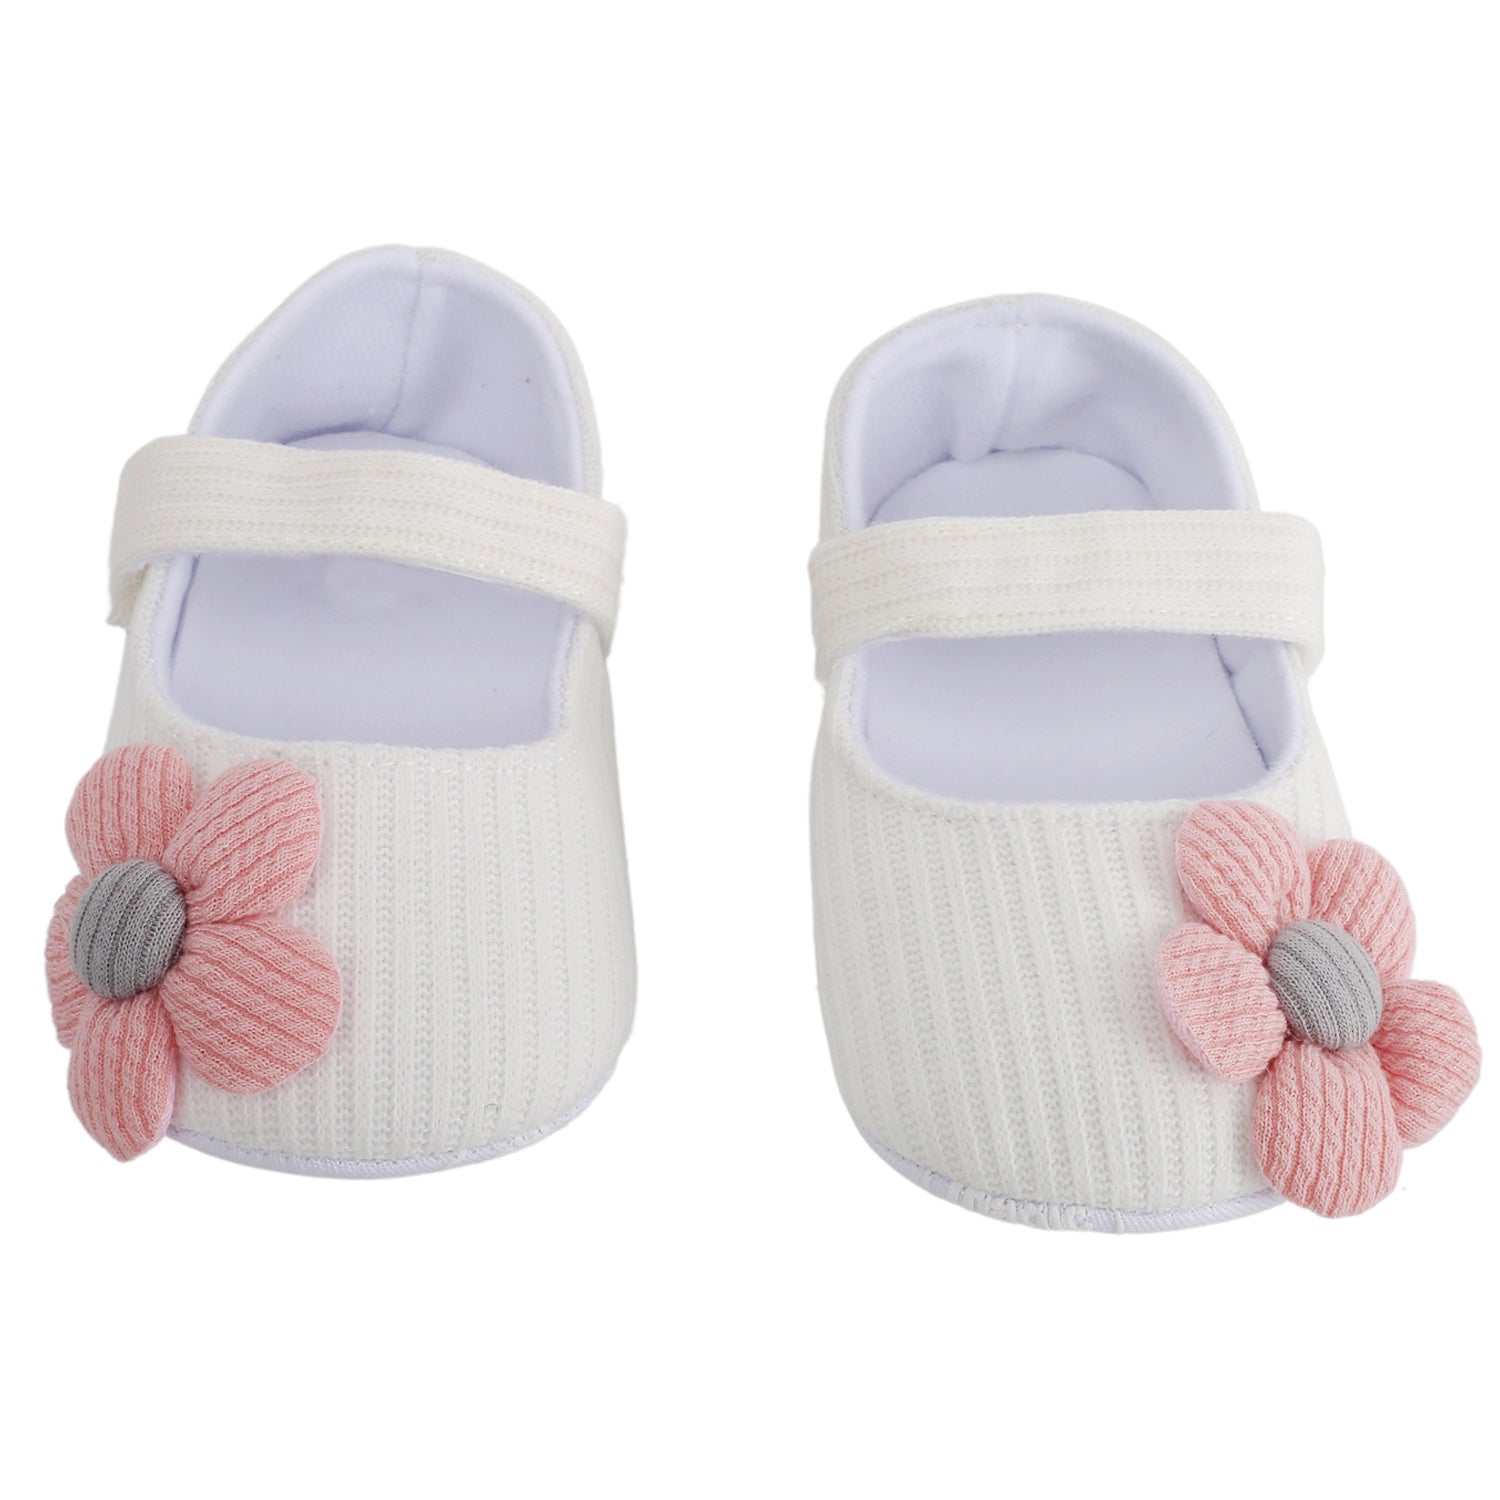 Baby Moo Floral Applique White Booties - Baby Moo